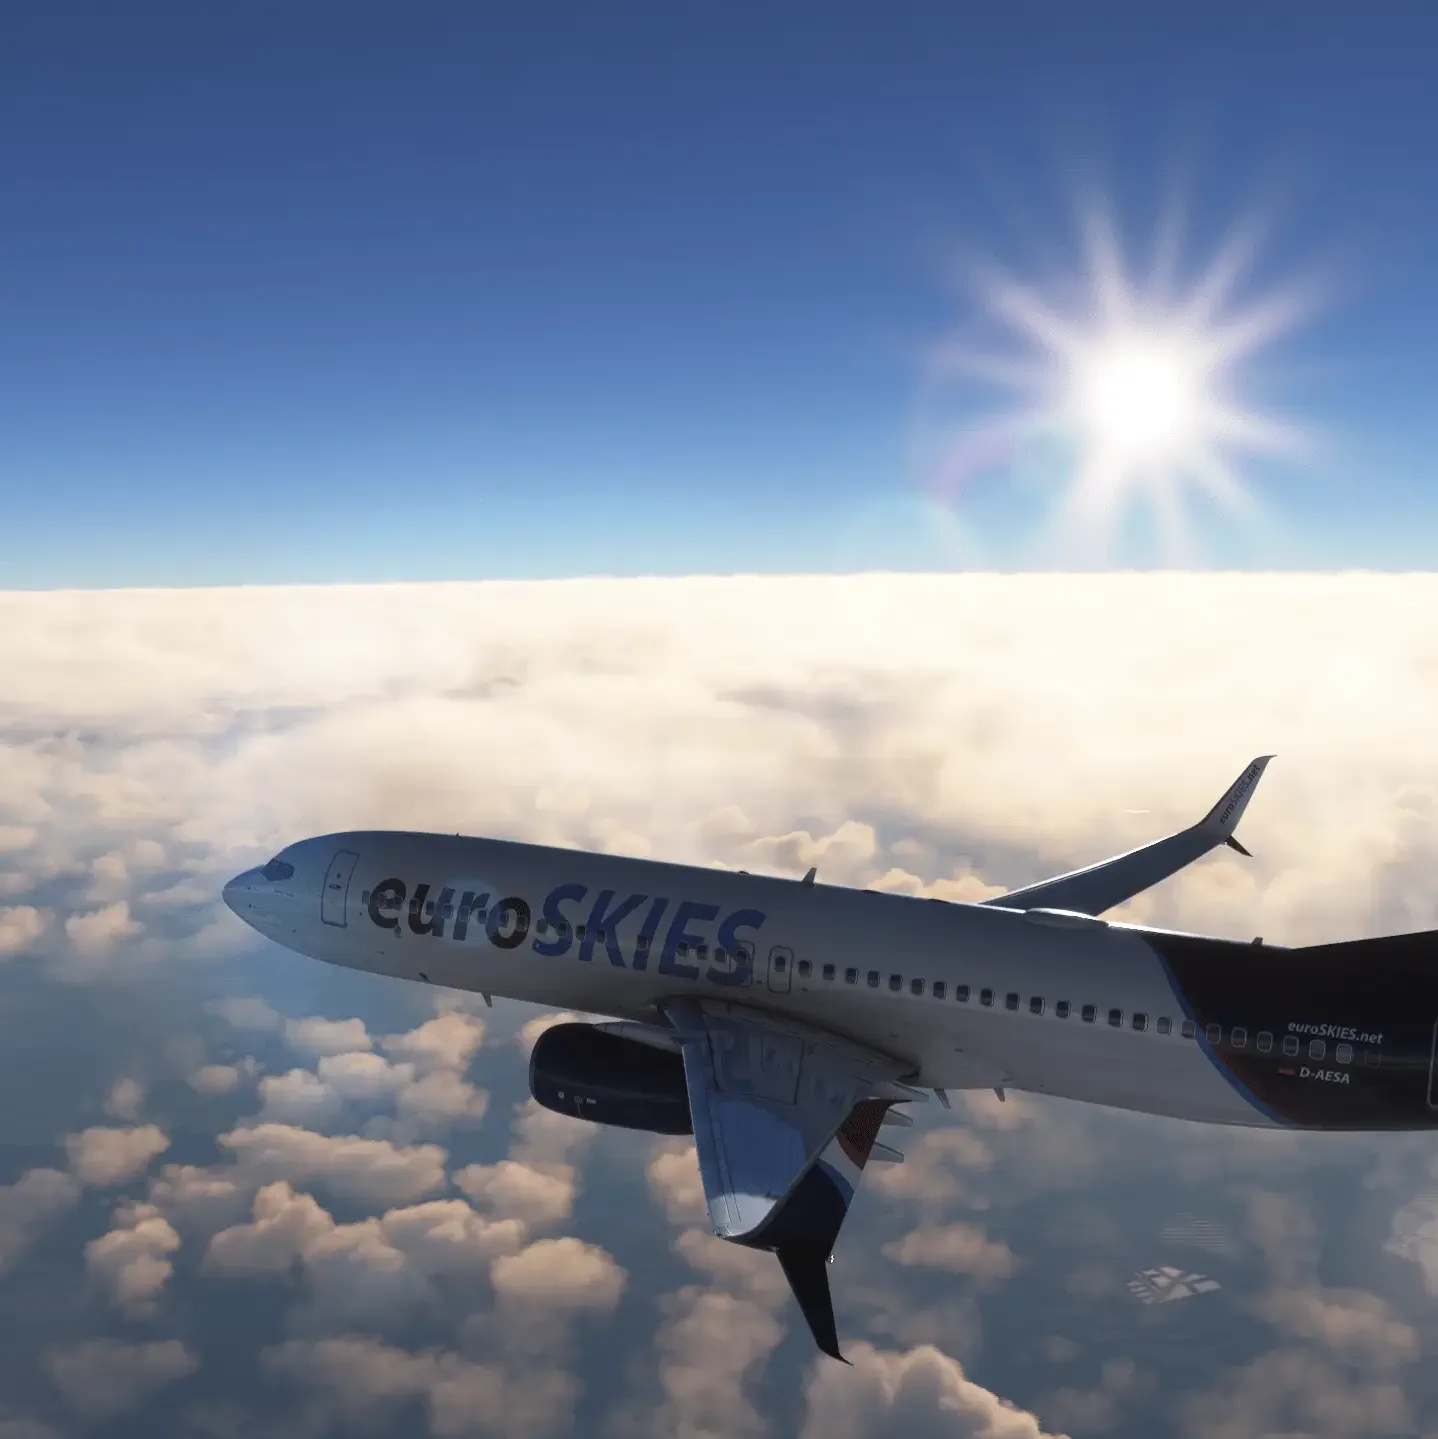 euroSKIES virtual airline member flying PMDG 737-800 above the clouds with the sun in the background.